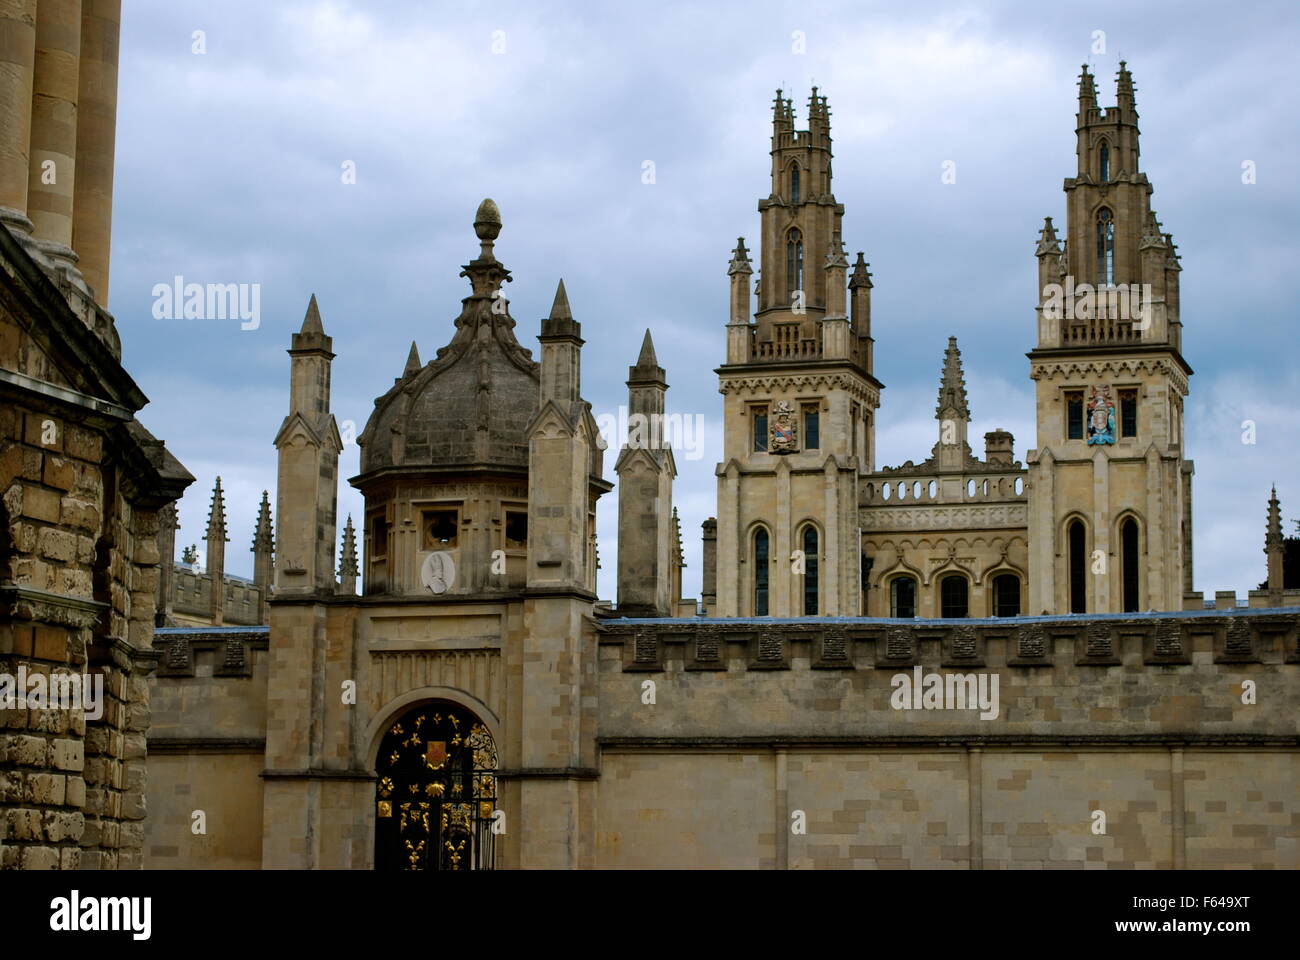 All Souls College at the university of Oxford. Oxford, England Stock Photo